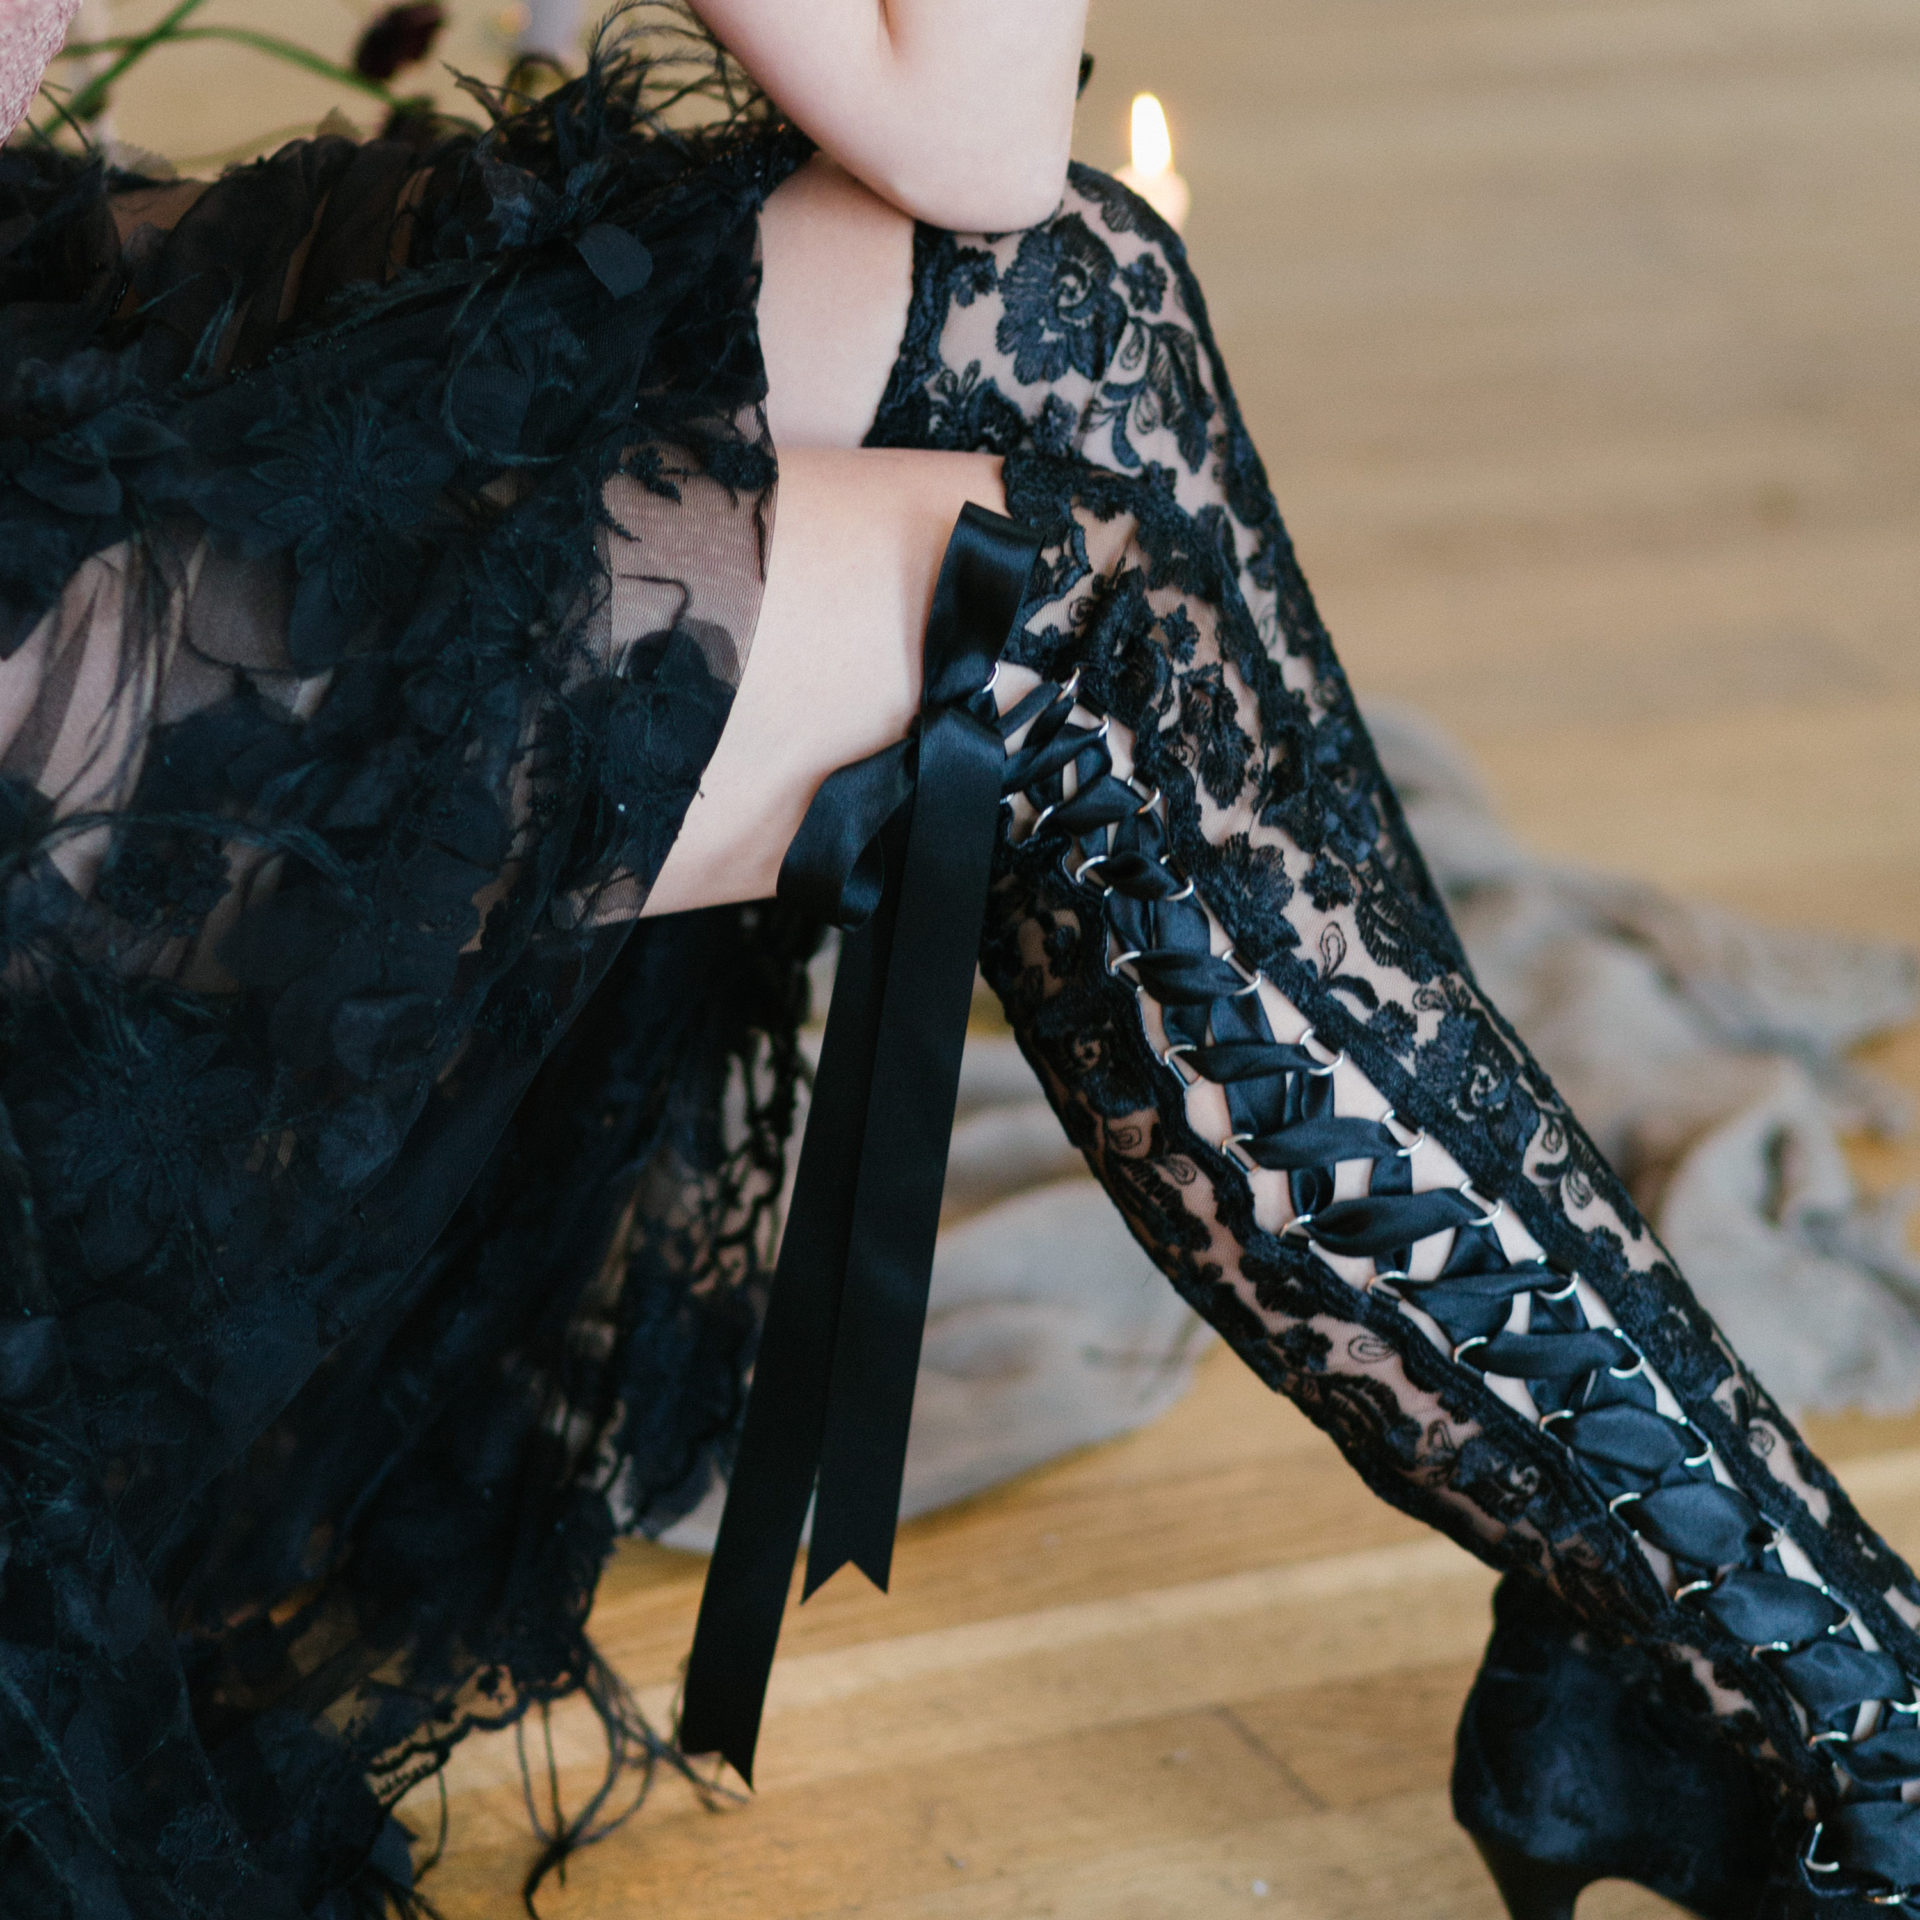 black lace over the knee boots